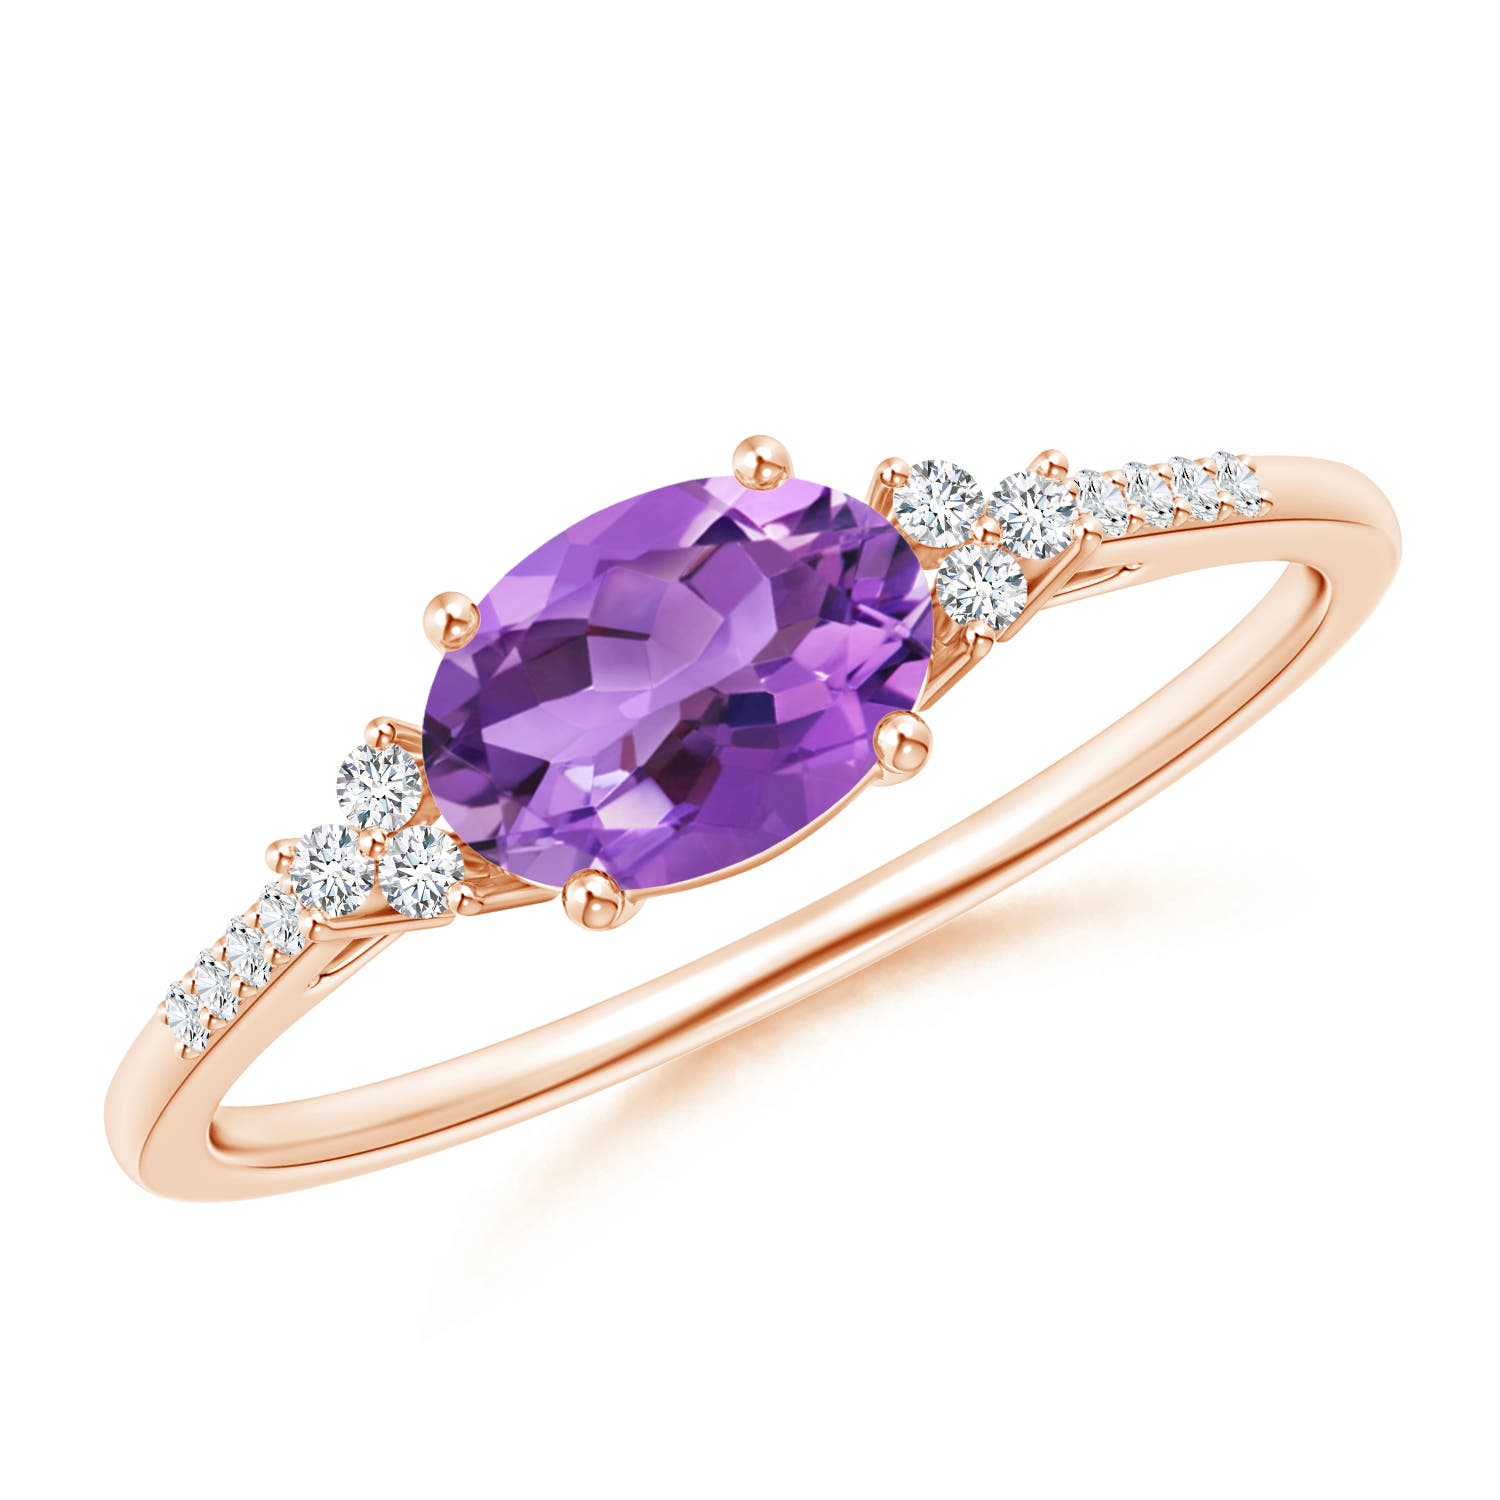 AA - Amethyst / 0.79 CT / 14 KT Rose Gold